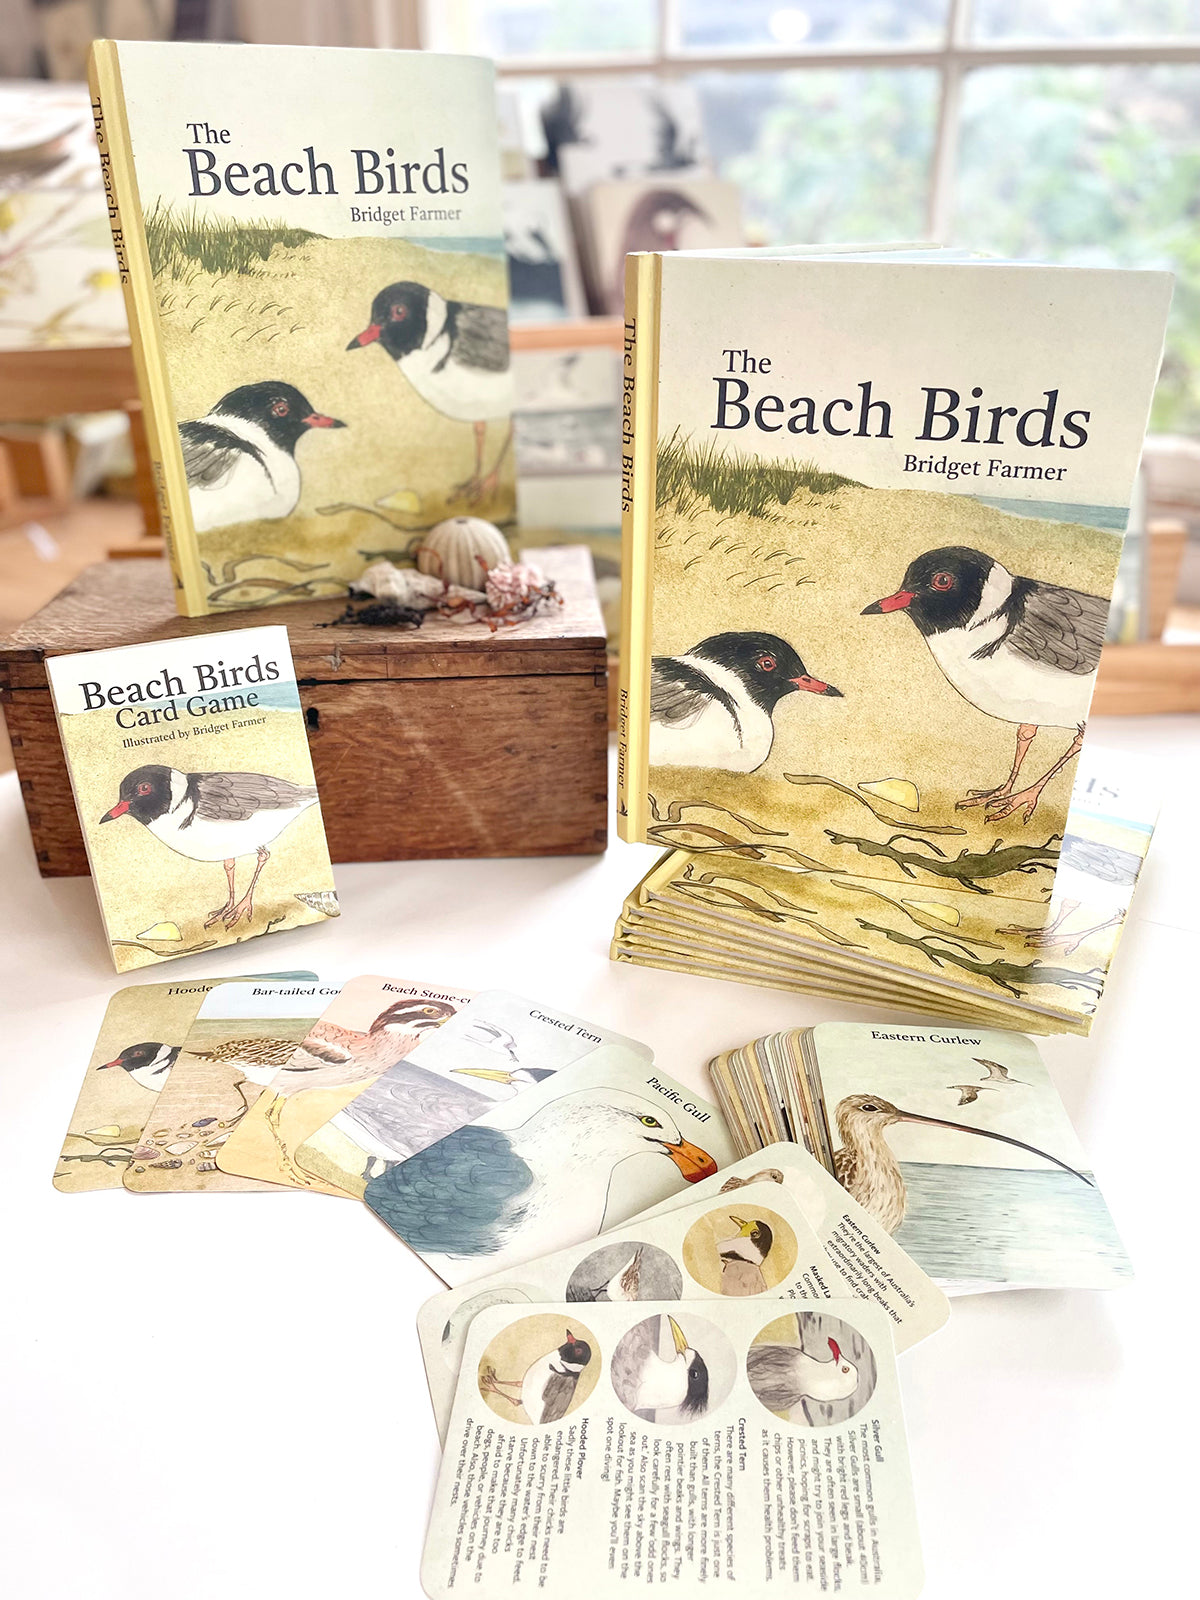 Book and Game Combo Deal - THE BEACH BIRDS